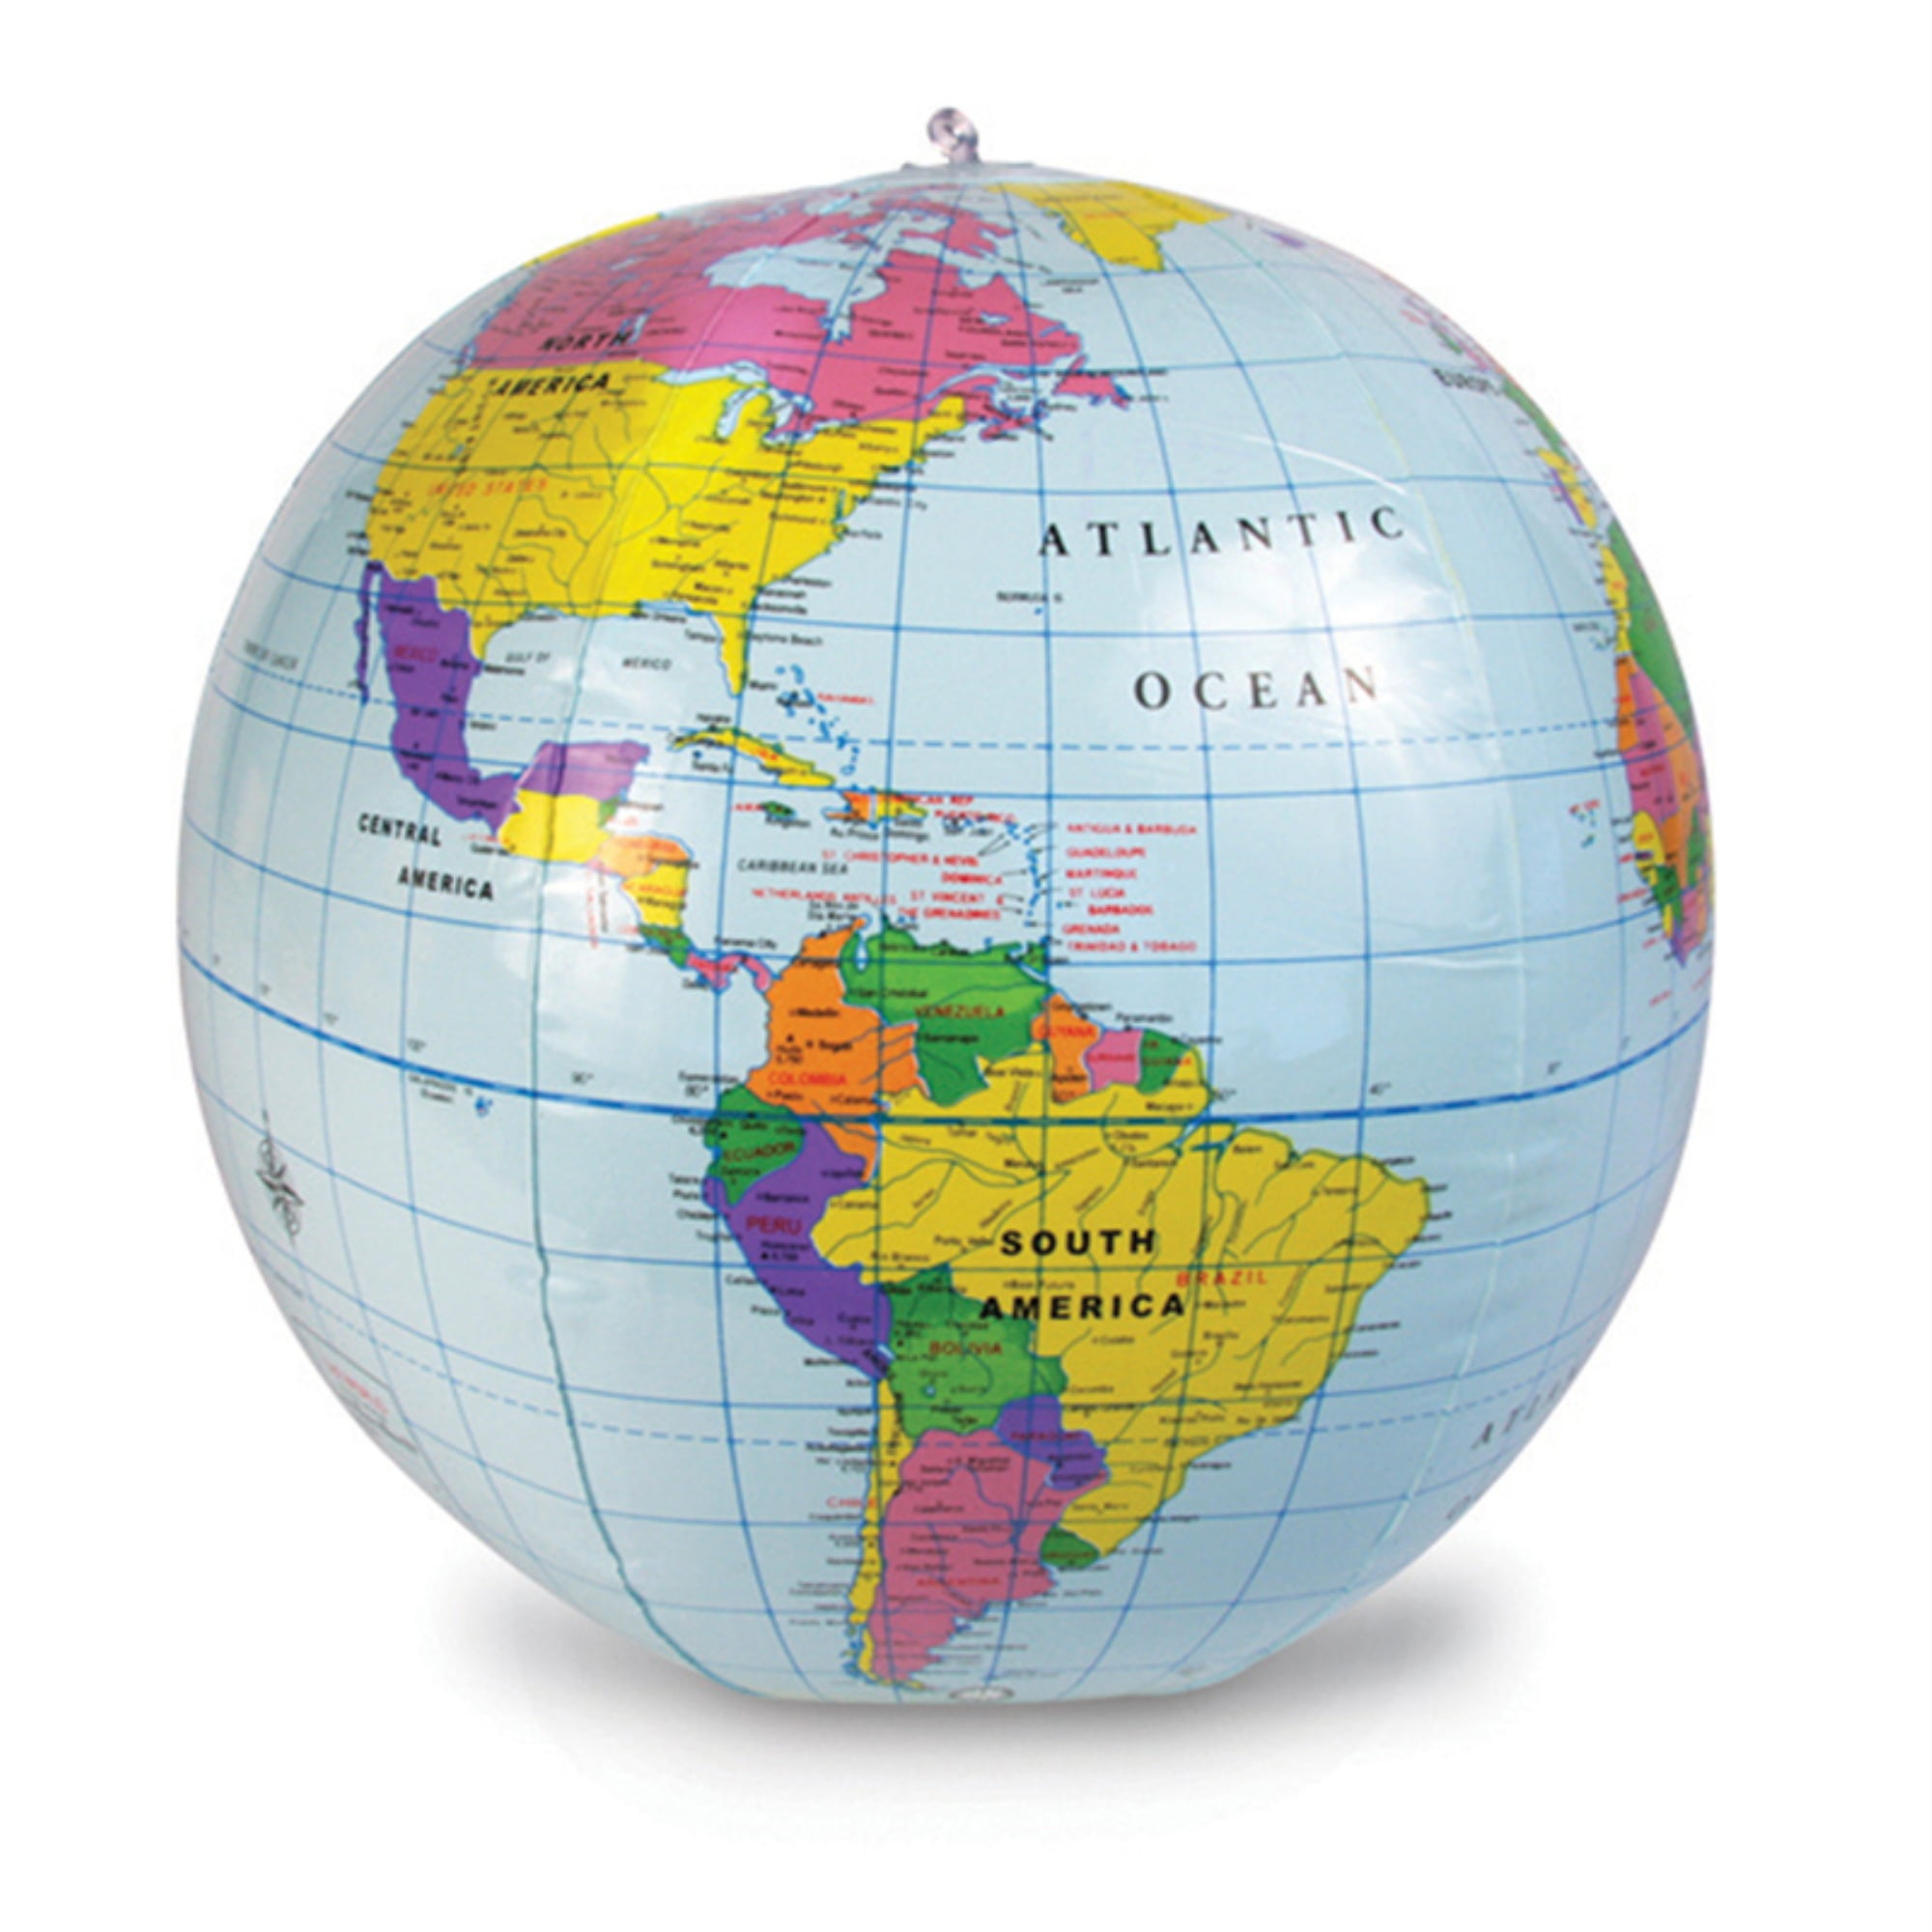 Large 90cm Inflatable World Earth Globe Atlas Map Geography Beach Ball Party Toy 